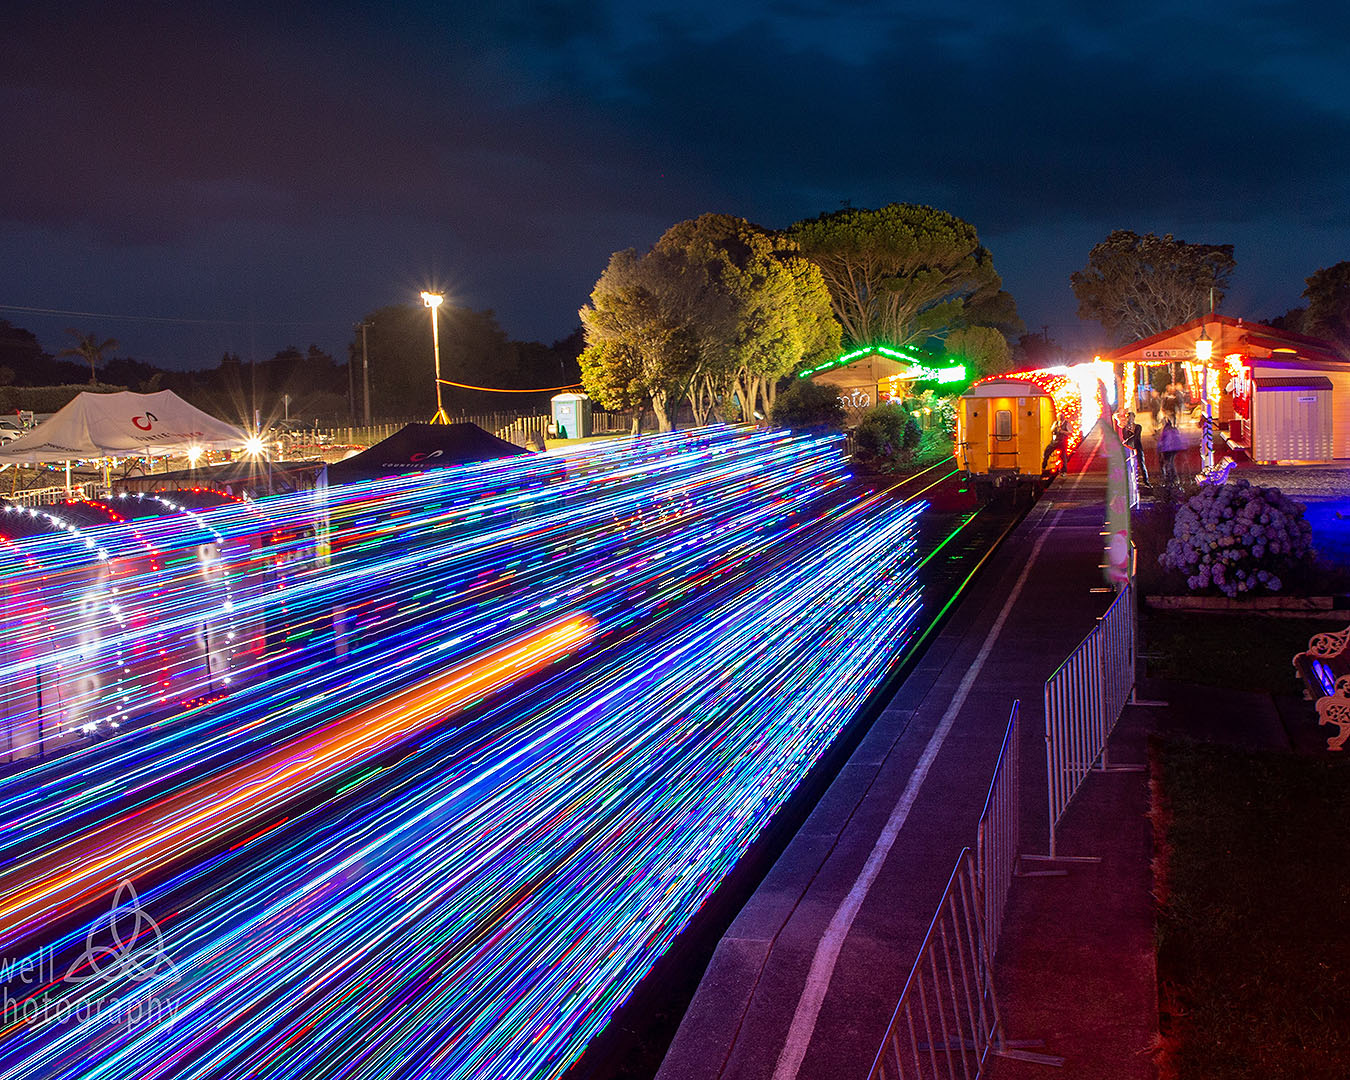 Glenbrook Vintage Railway all lit up for Christmas, definitely one of the best places to see Christmas lights in Auckland.